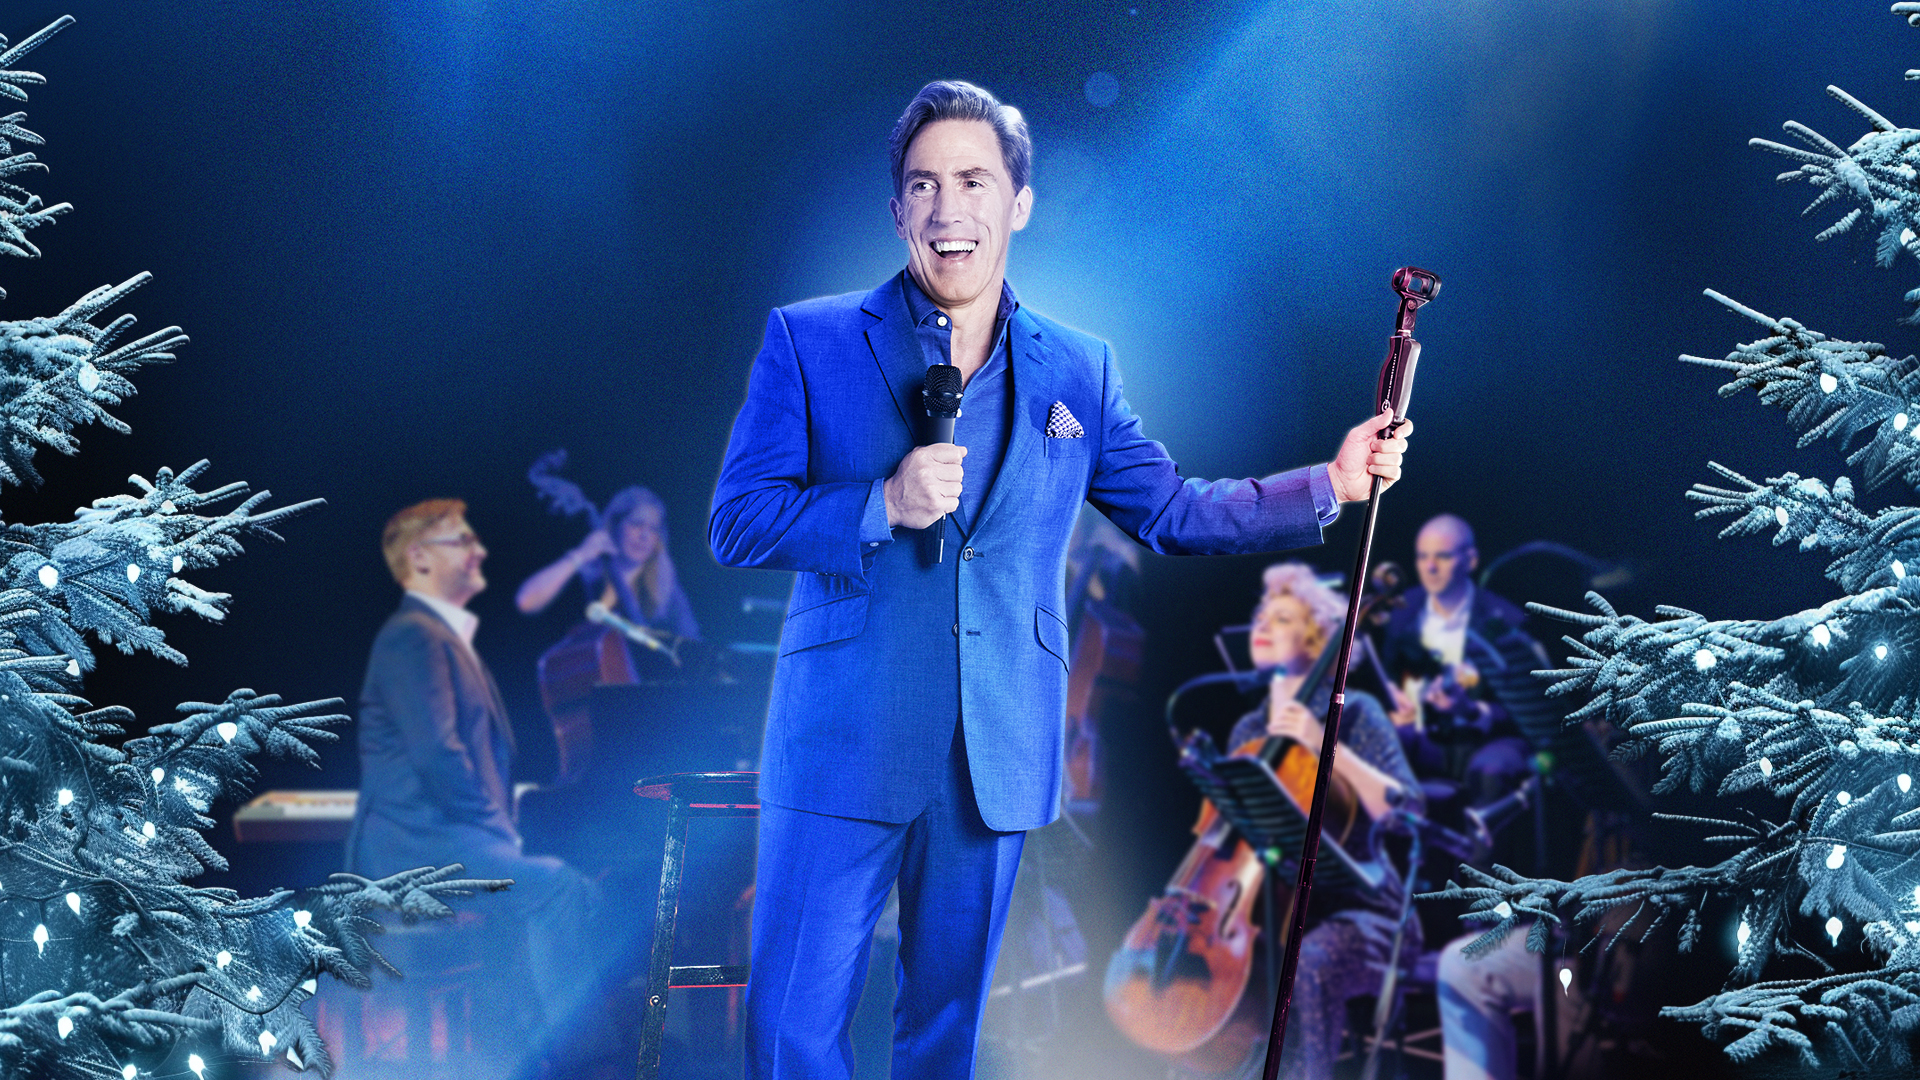 Rob Brydon & His Fabulous Band: A Festive Night Of Songs & Laughter